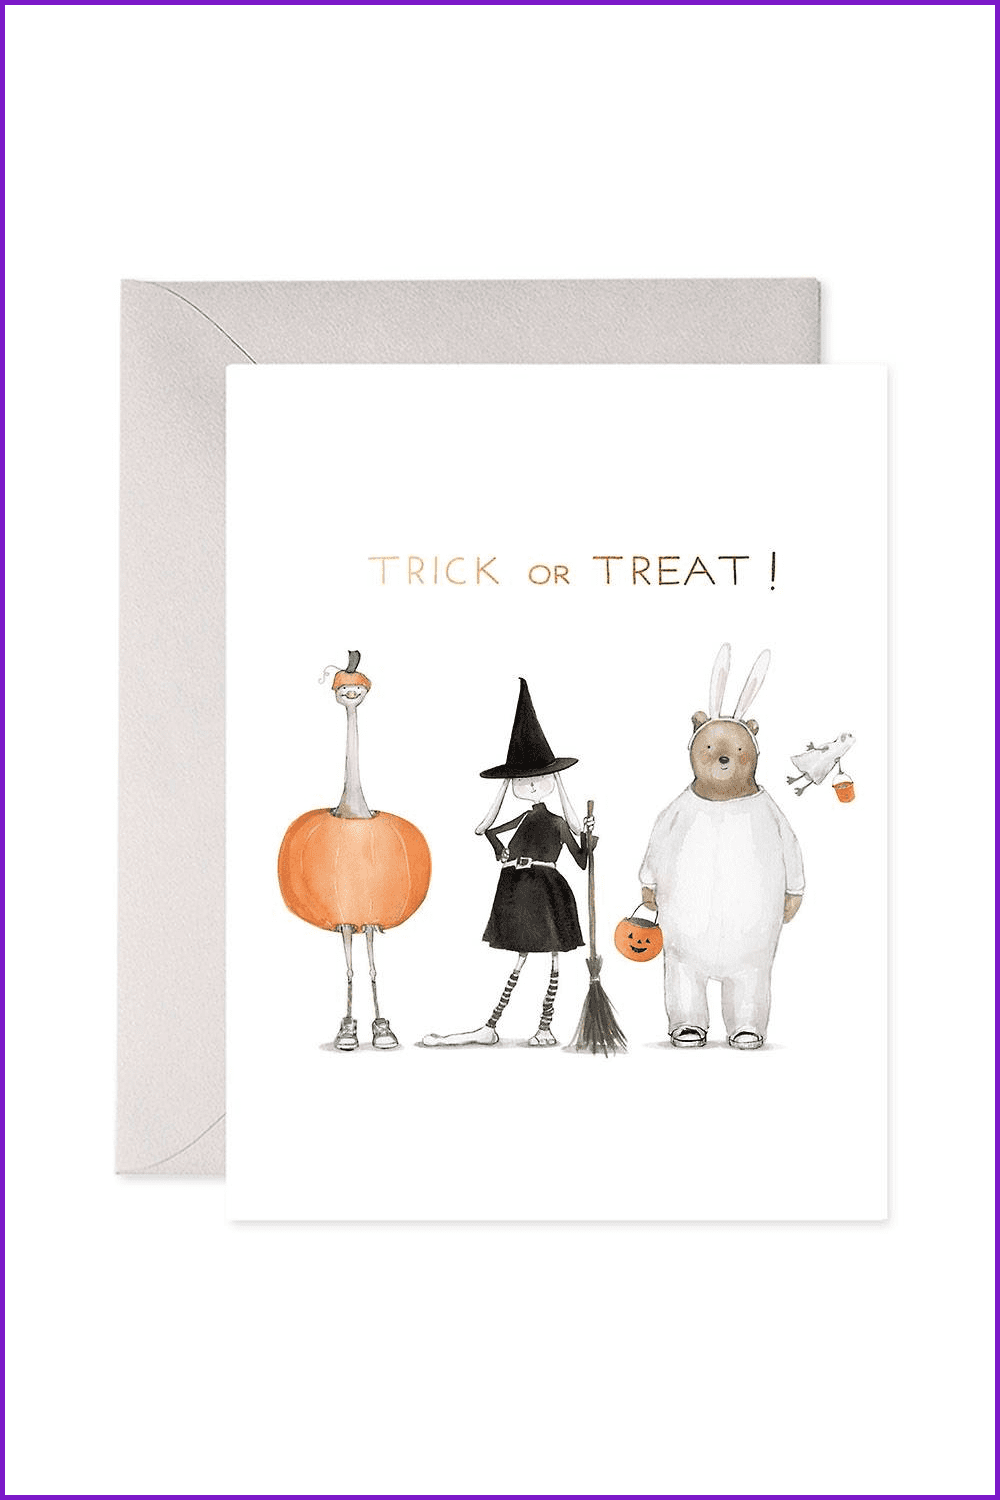 Little witch, teddy bear in pajamas and ostrich in a pumpkin on a postcard.